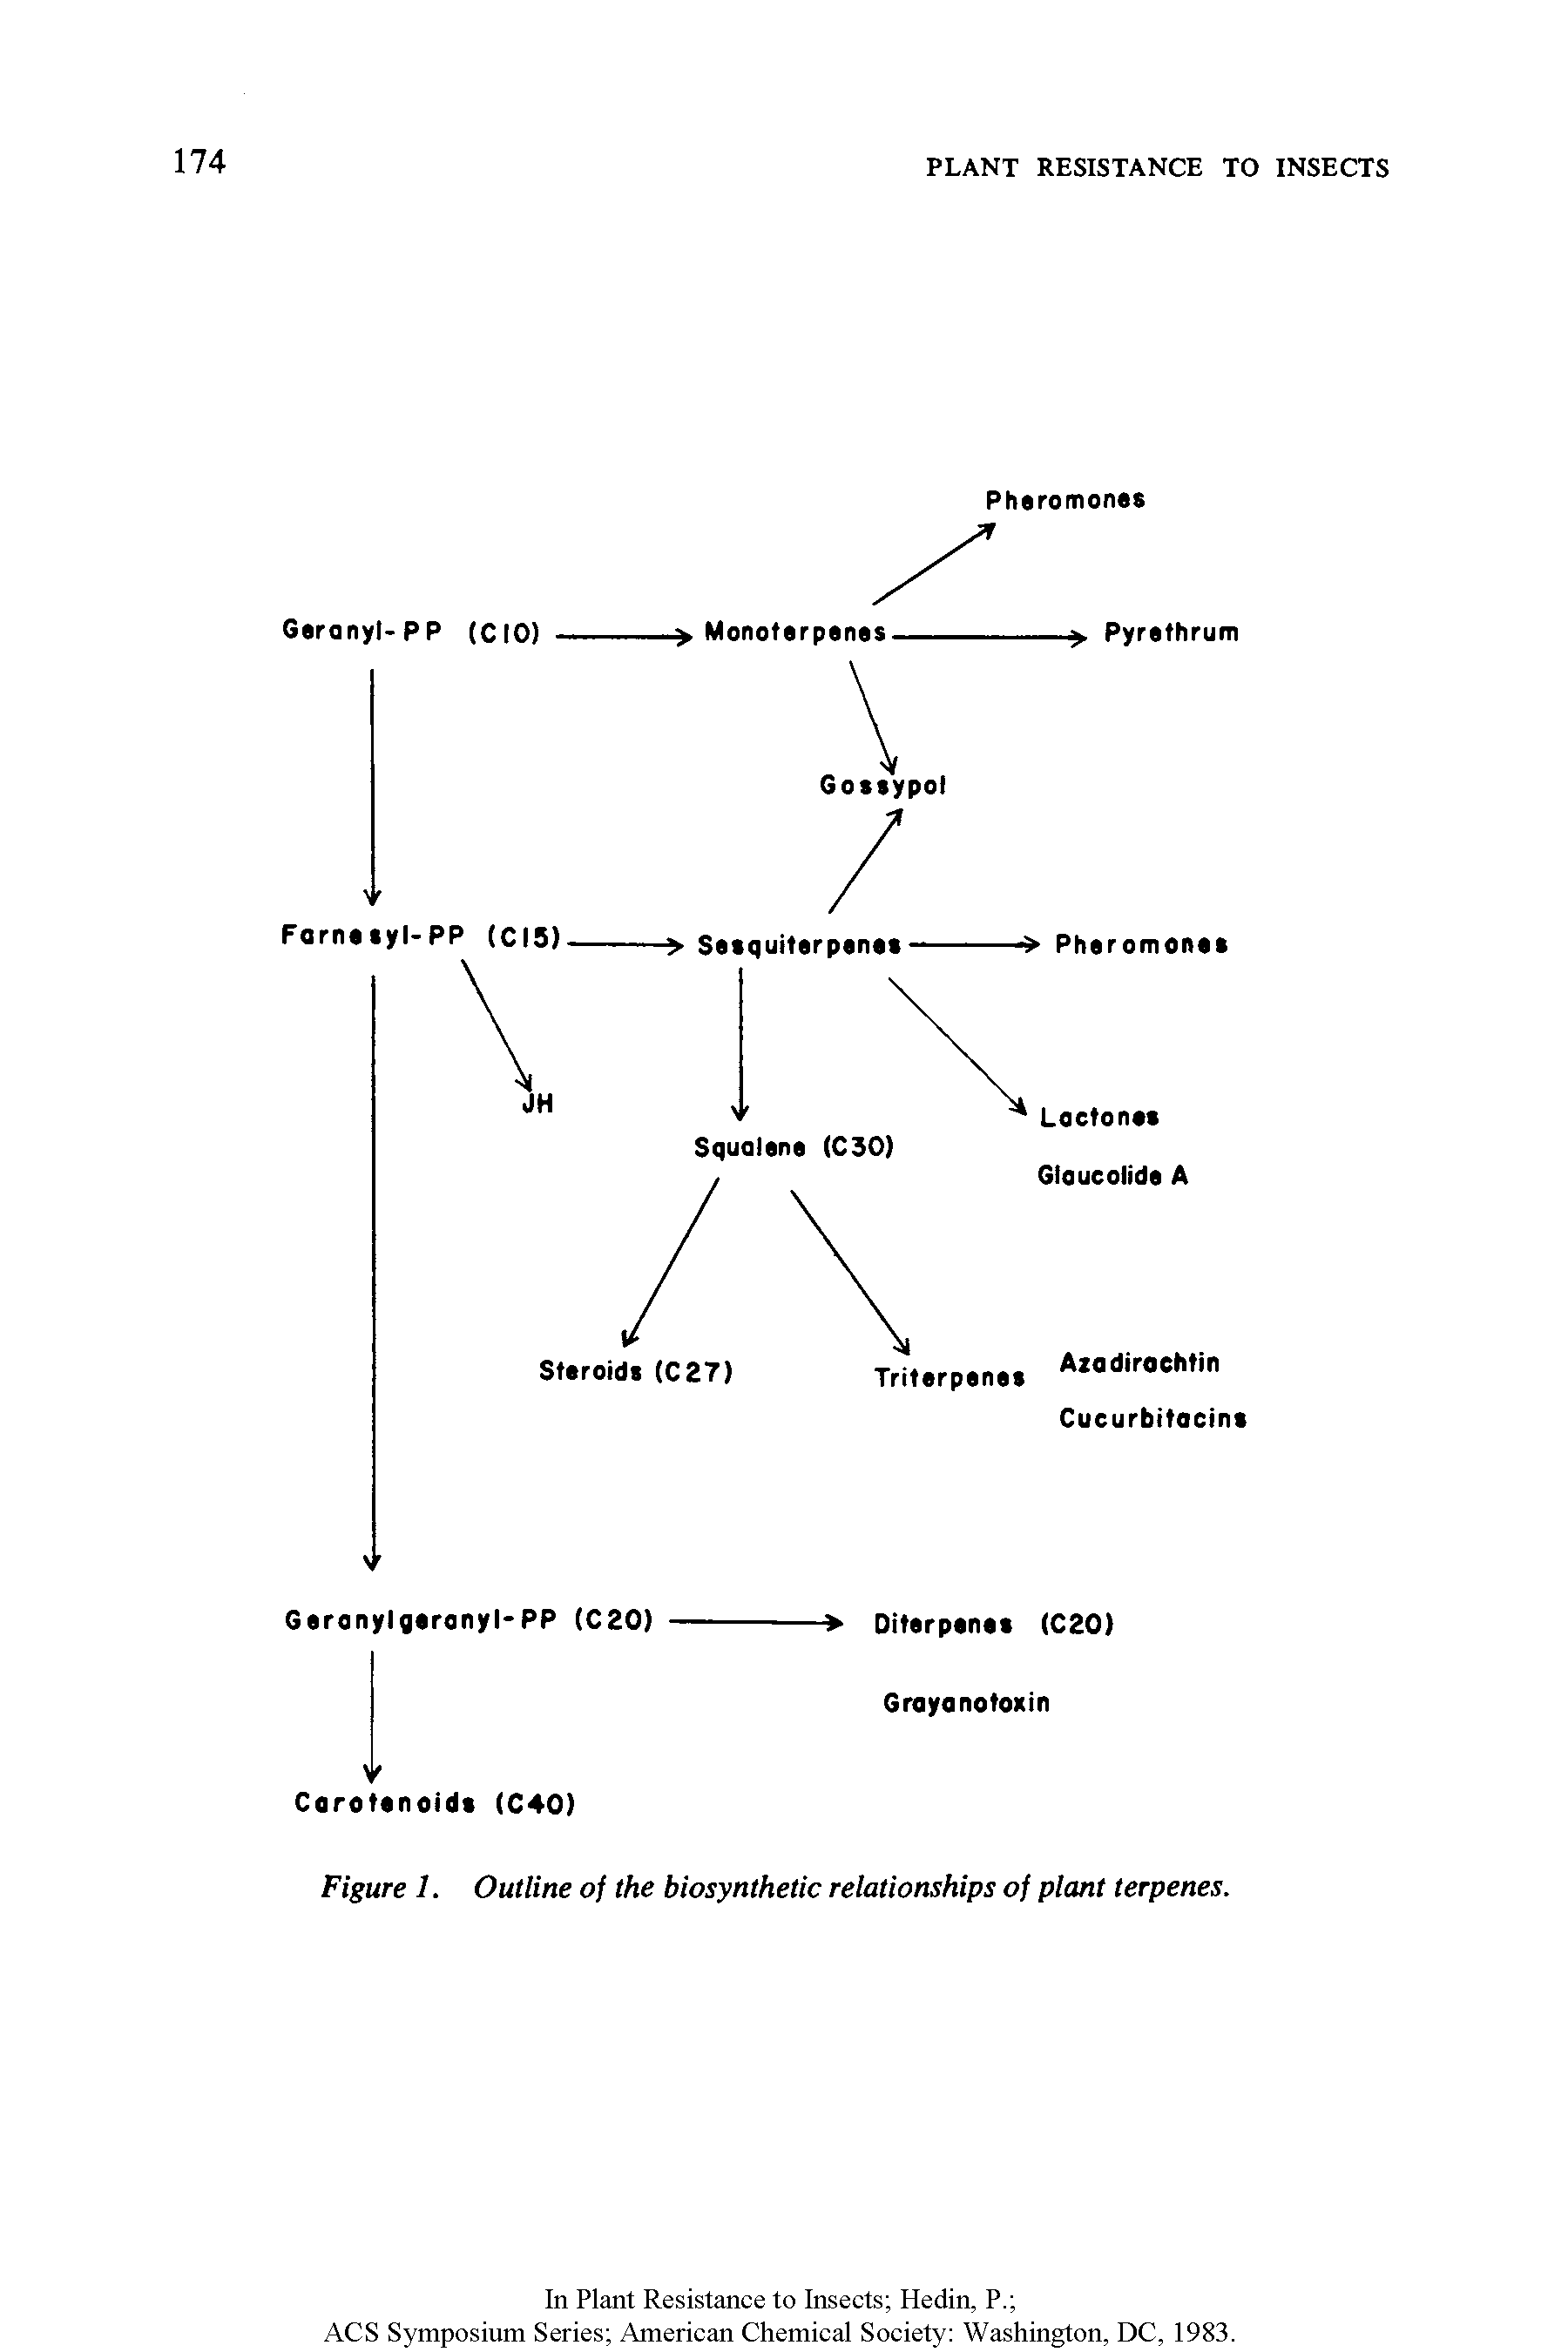 Figure I. Outline of the biosynthetic relationships of plant terpenes.